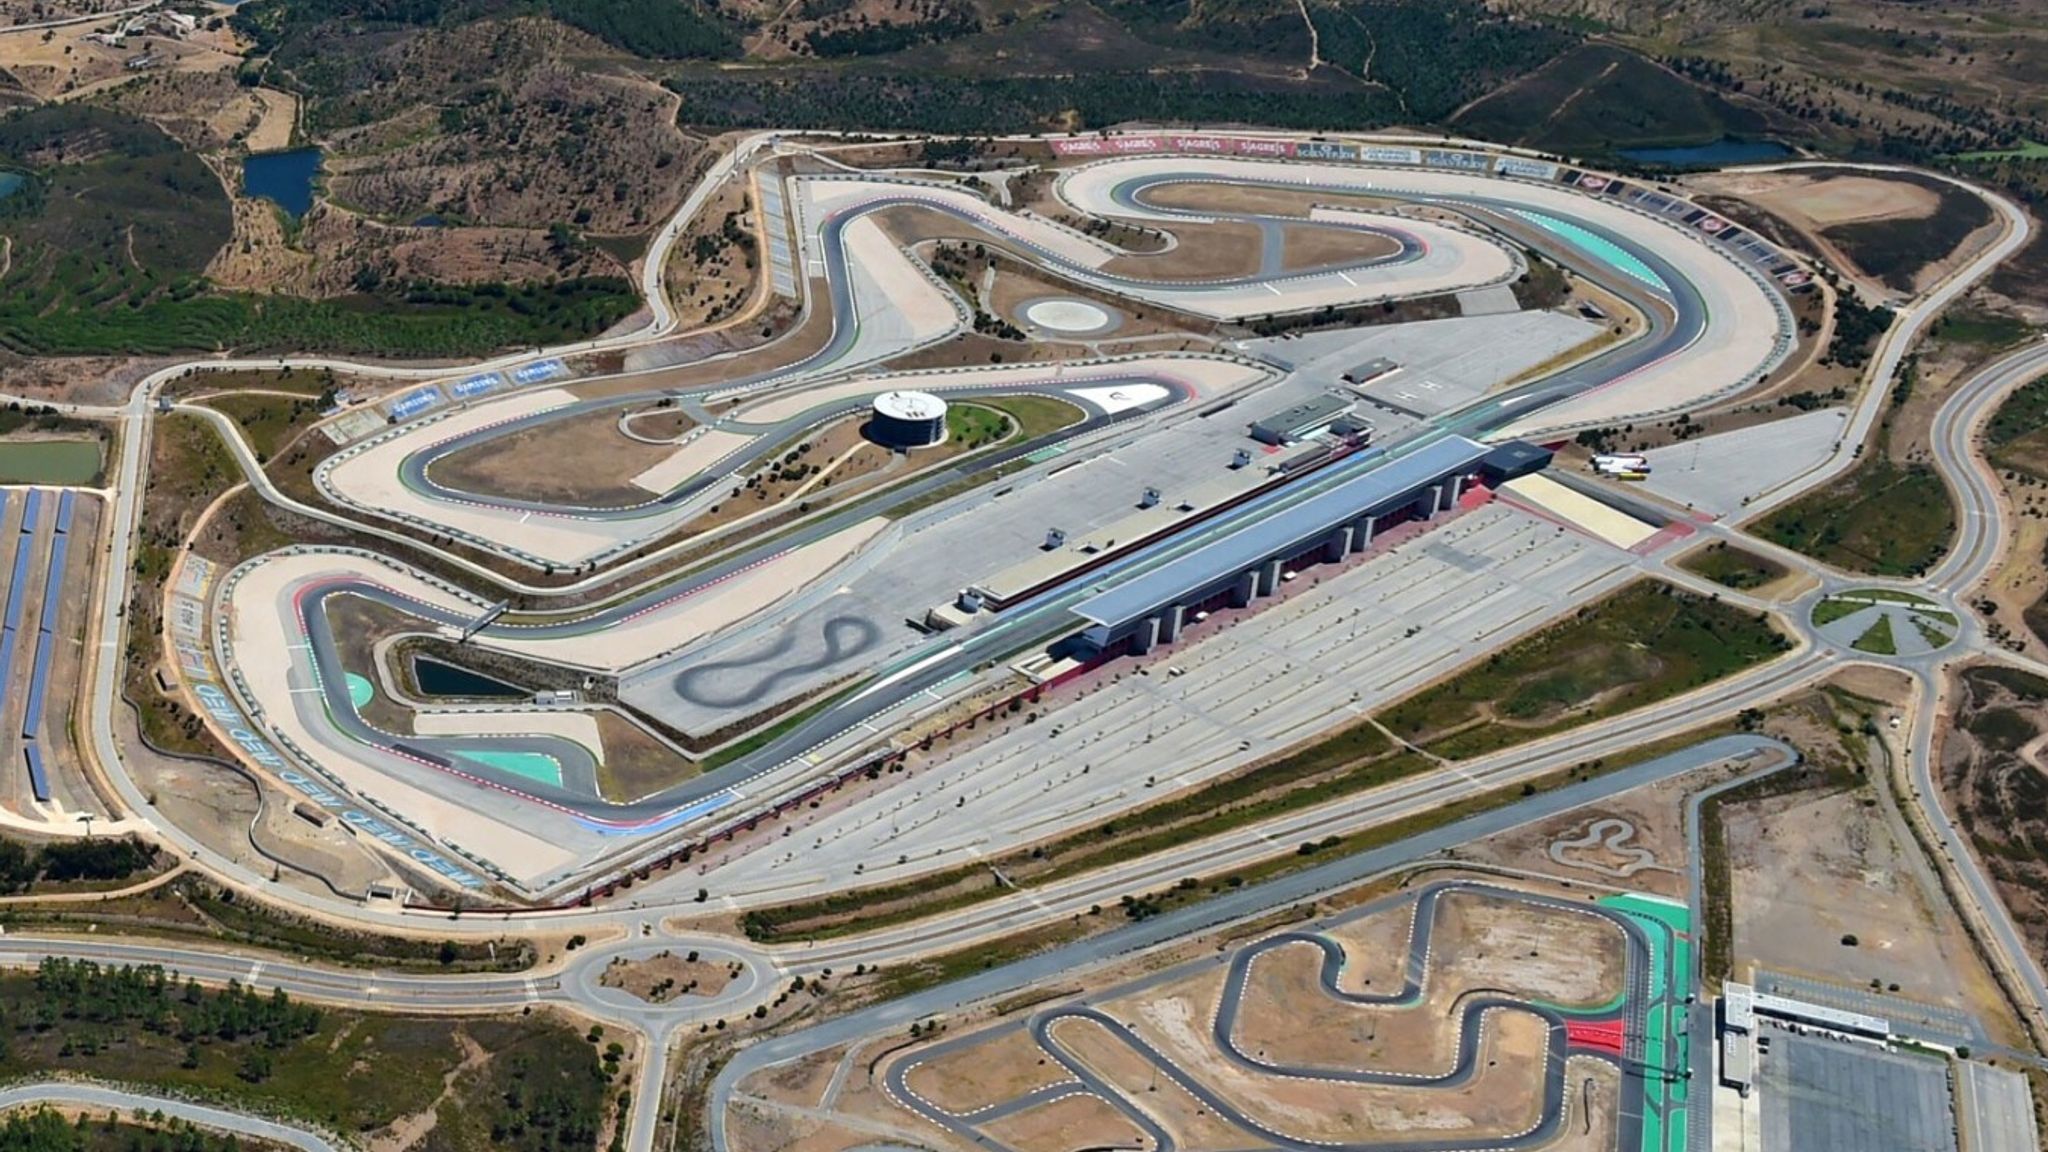 Portugal to host the debut of MotoGP 2023!